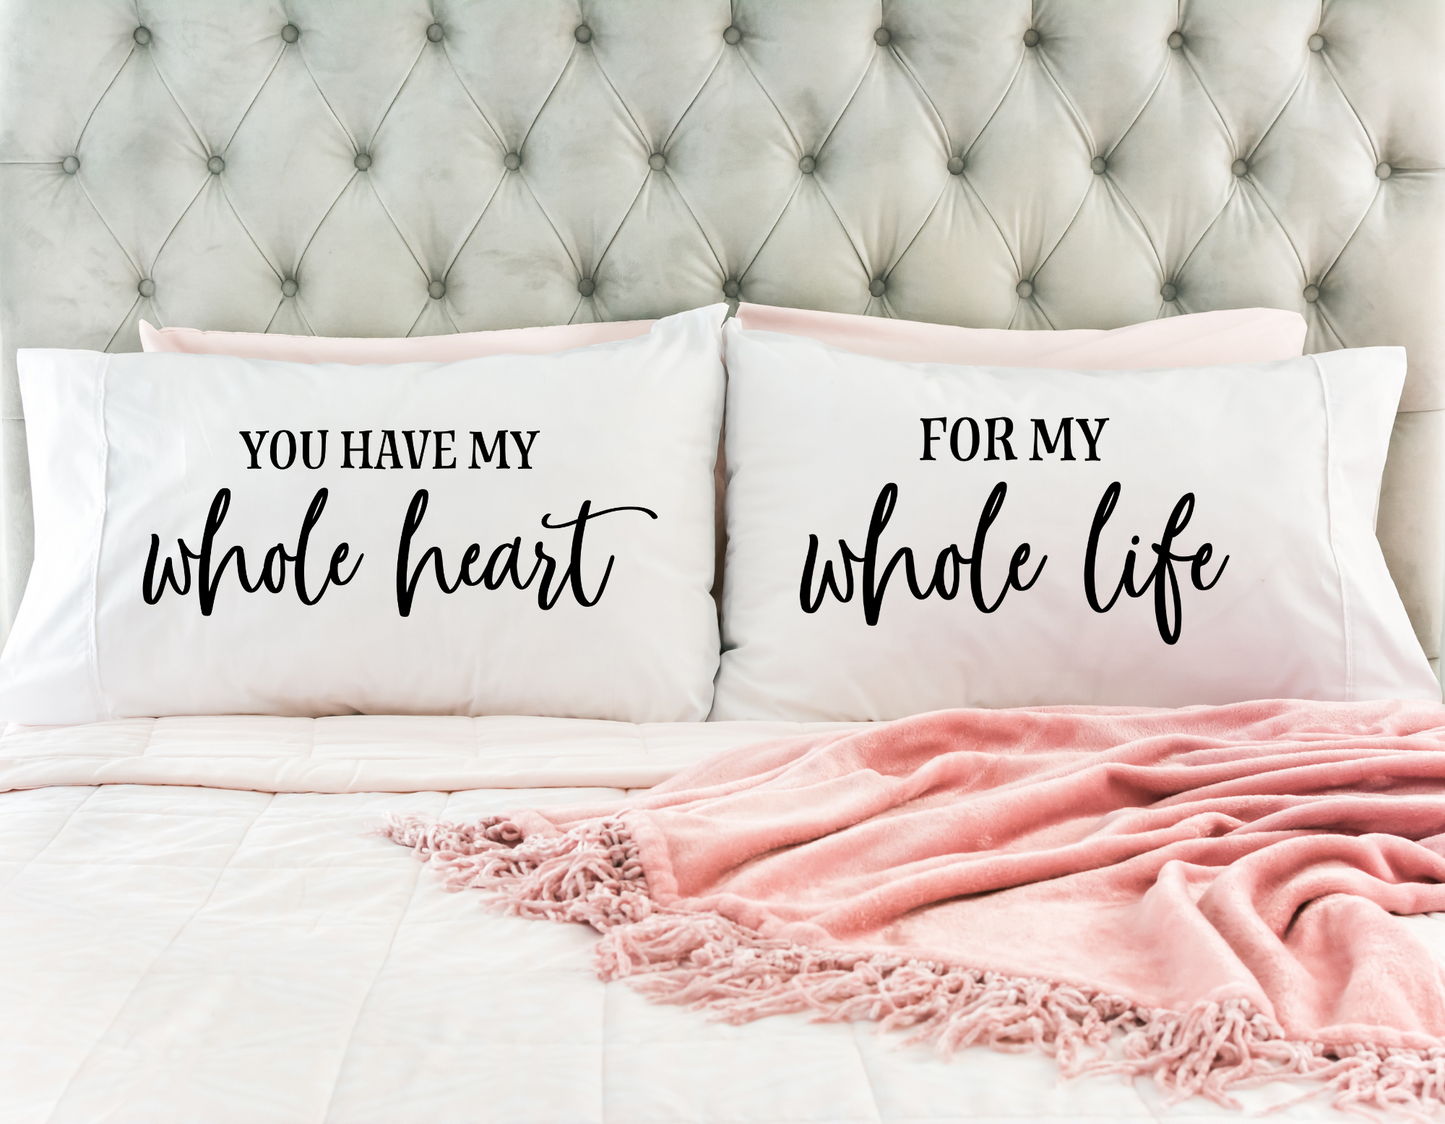 You Have My Whole Heart for My Whole Life Pillowcase Set